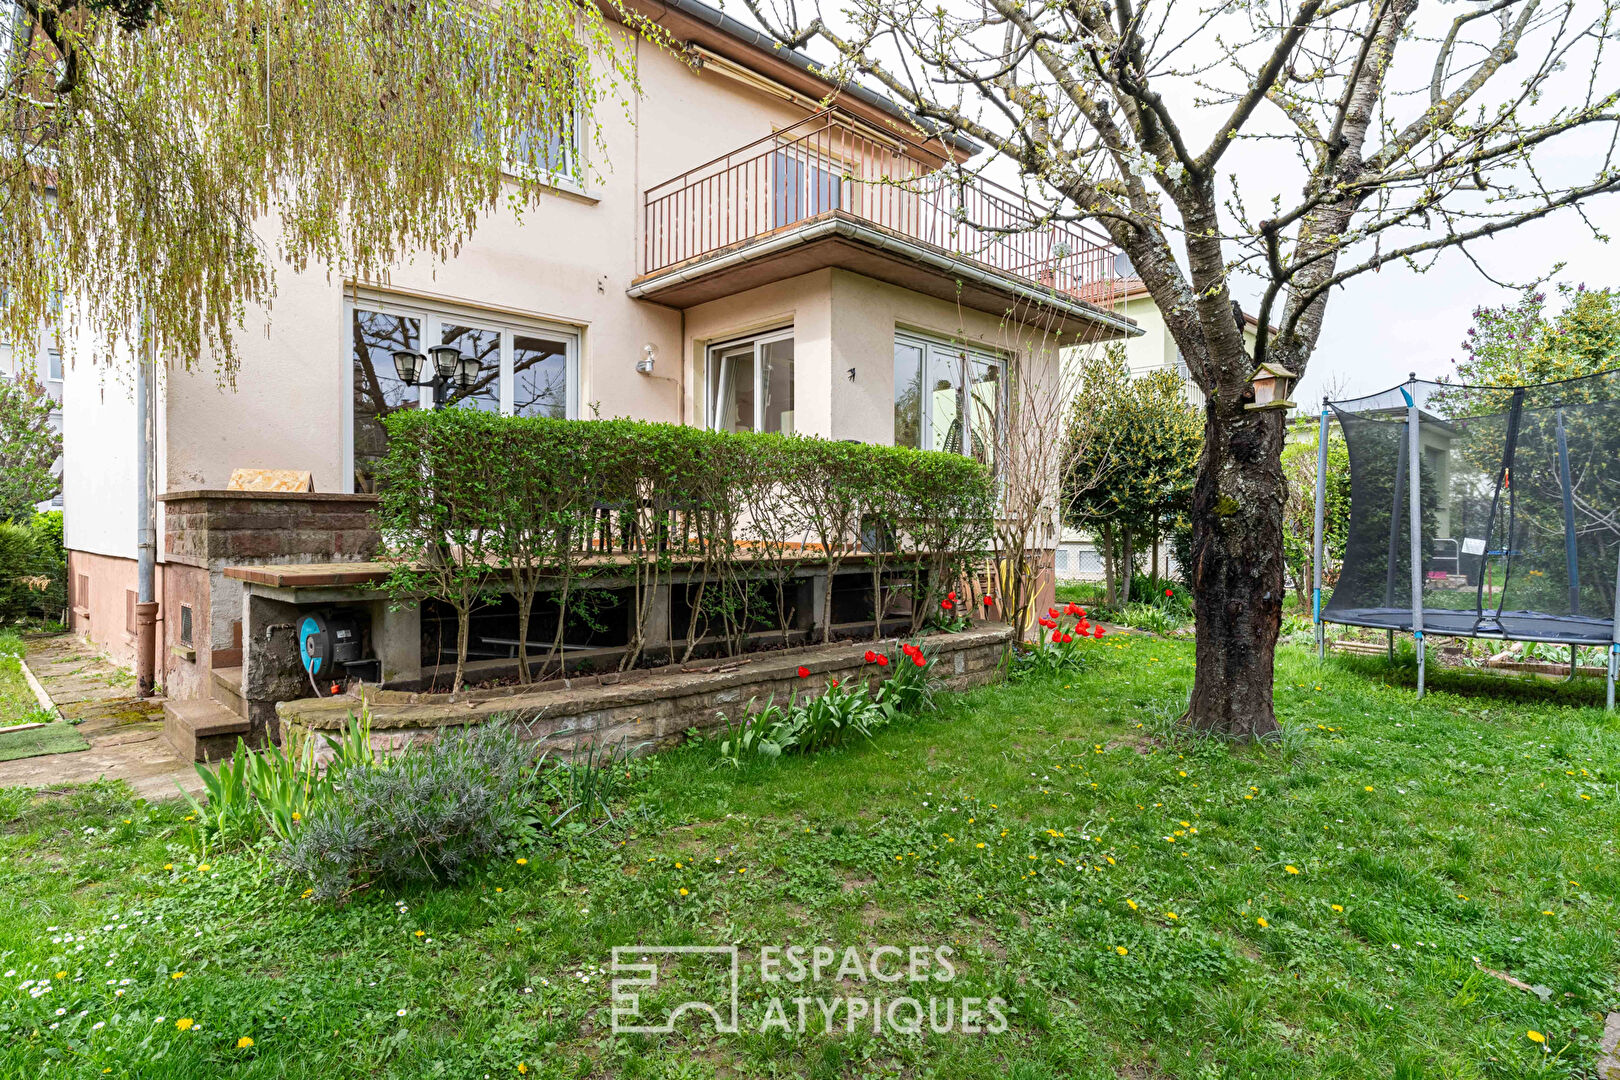 60s house with garden in the Saint Antoine district